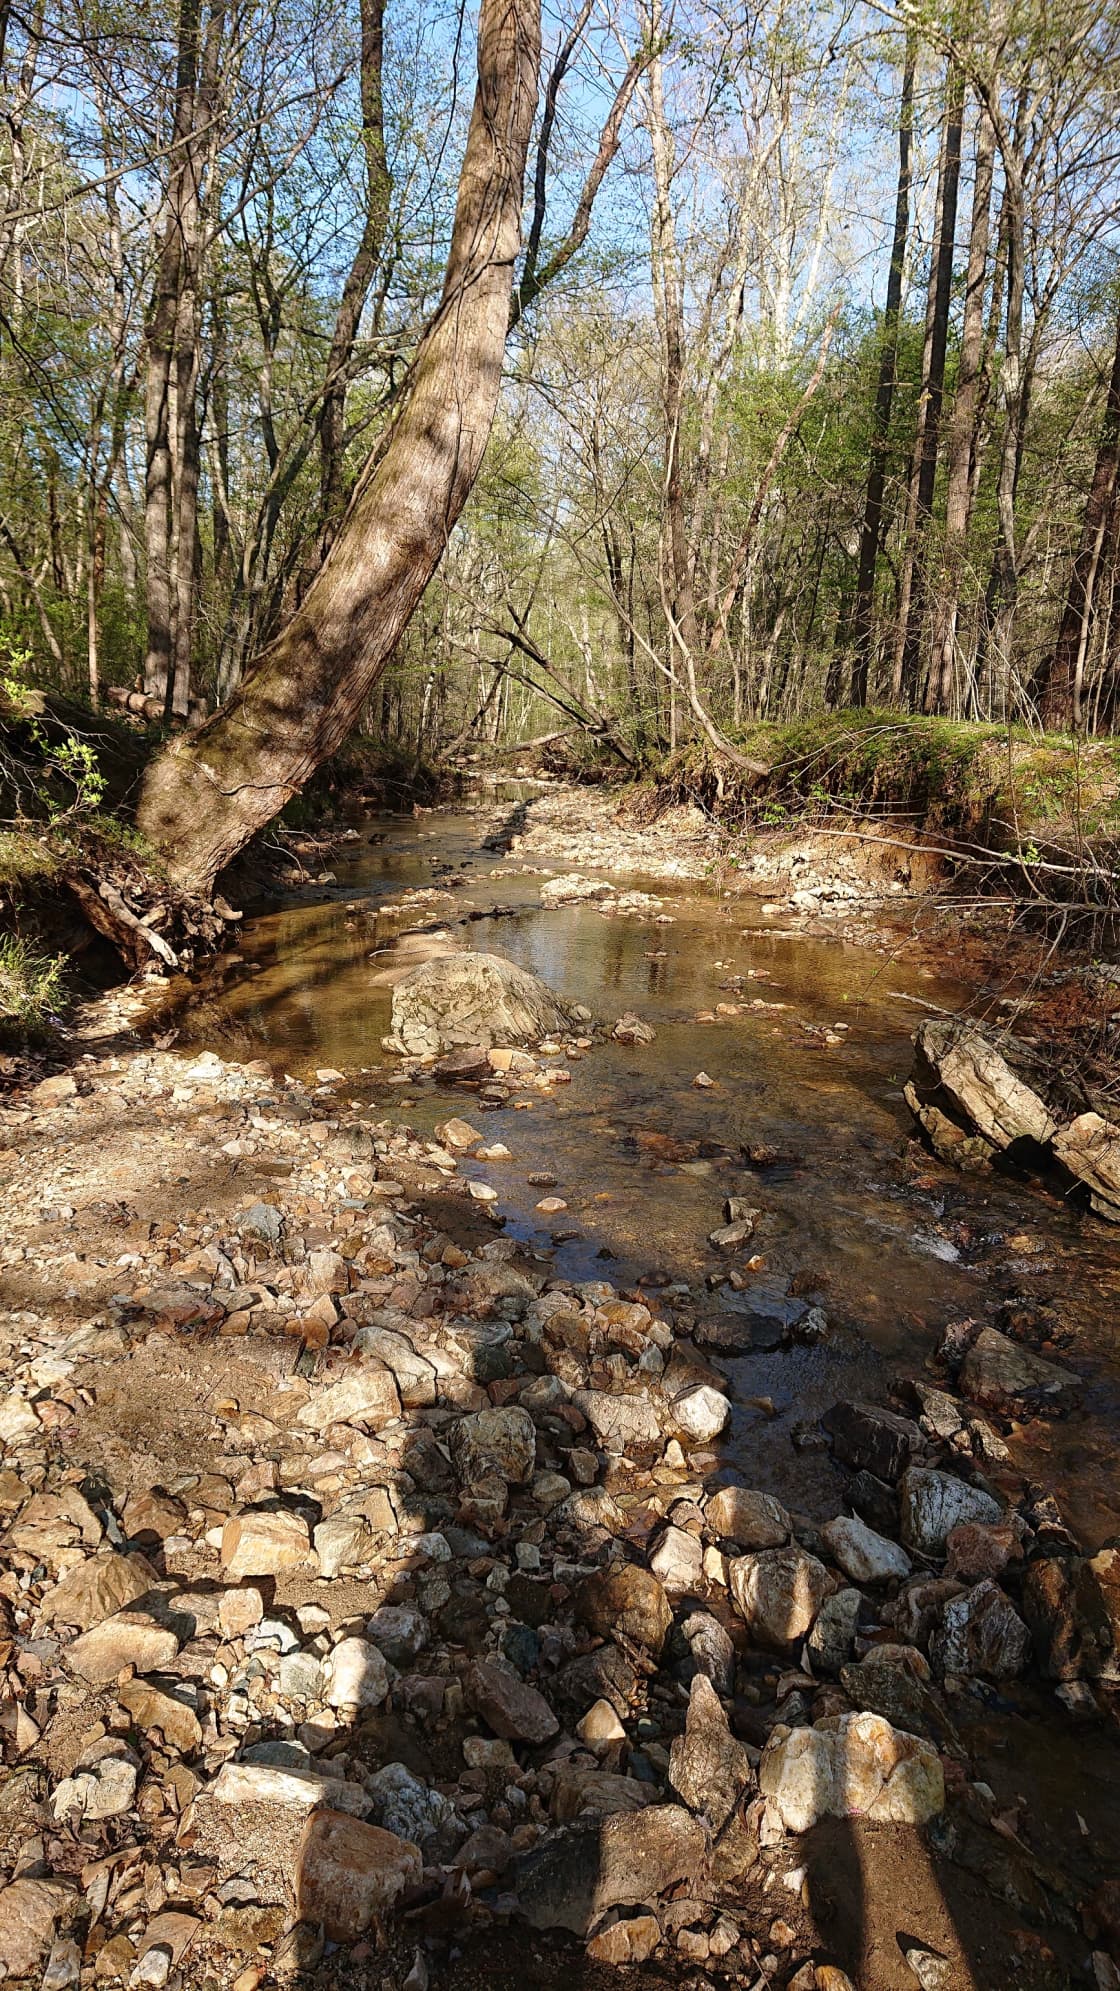 Creek located on the property